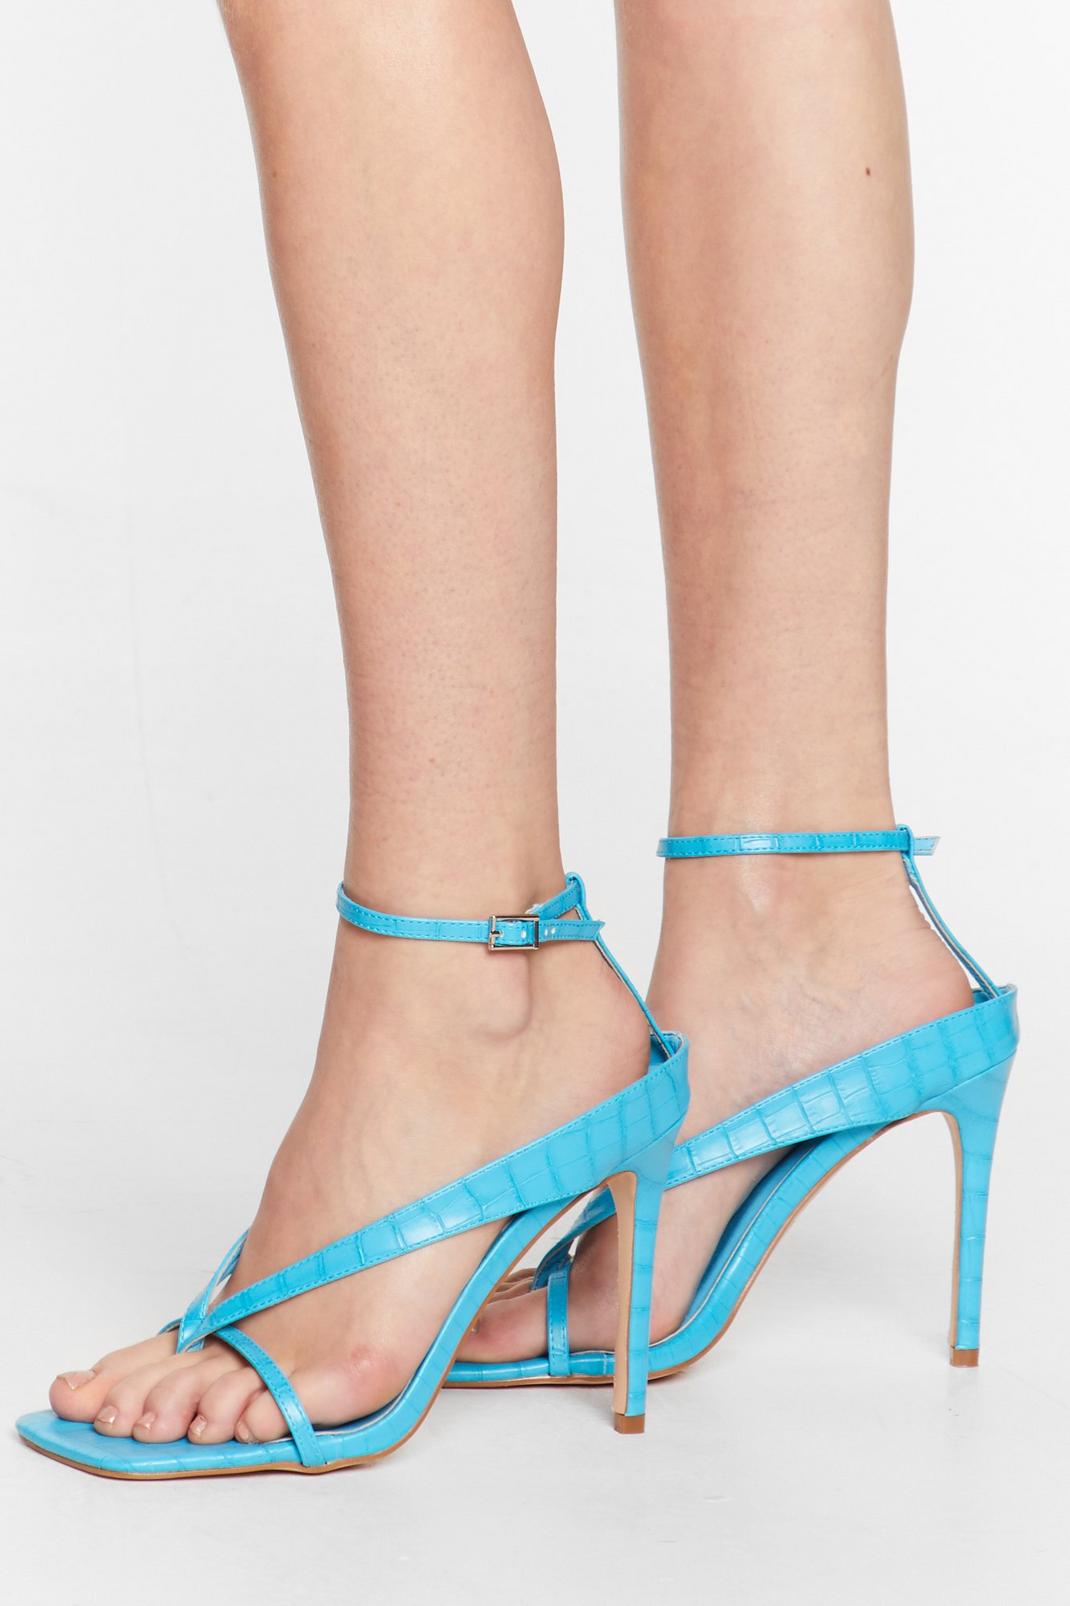 Thong Time Coming Strappy Stiletto Heels | Nasty Gal